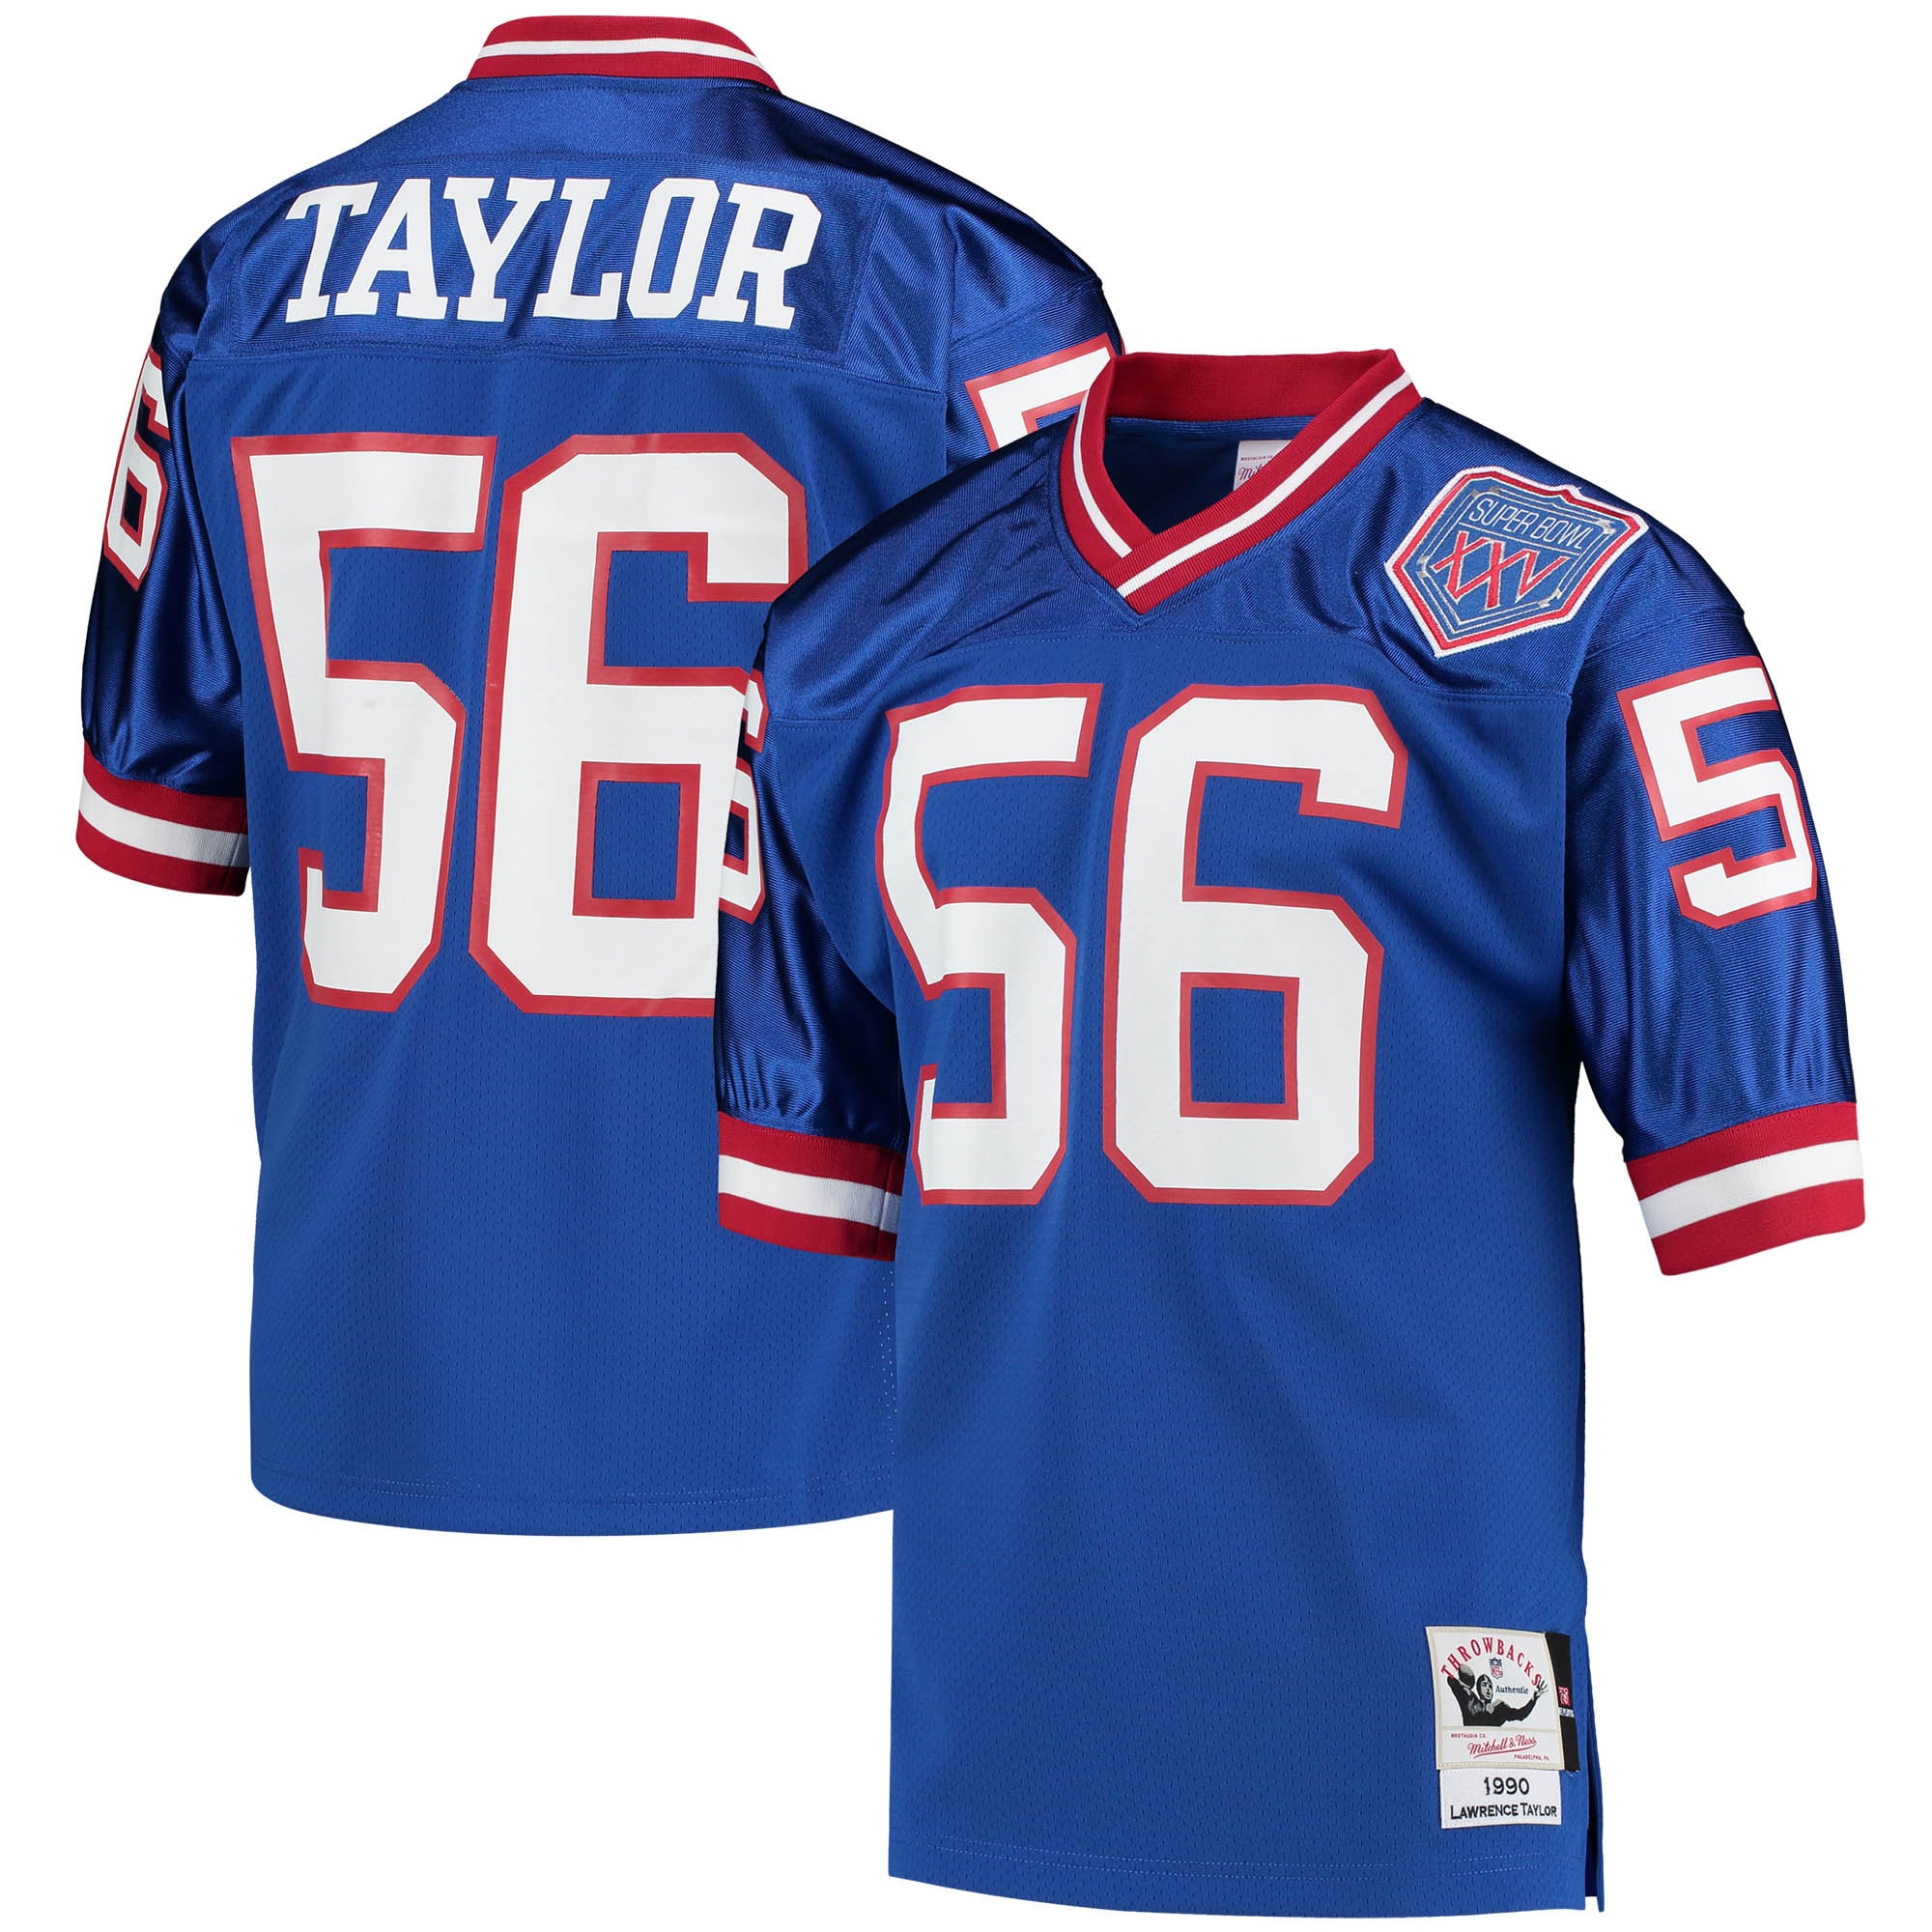 Men's New York Giants Jerseys Royal Lawrence Taylor 1990 Authentic Throwback Retired Player Style